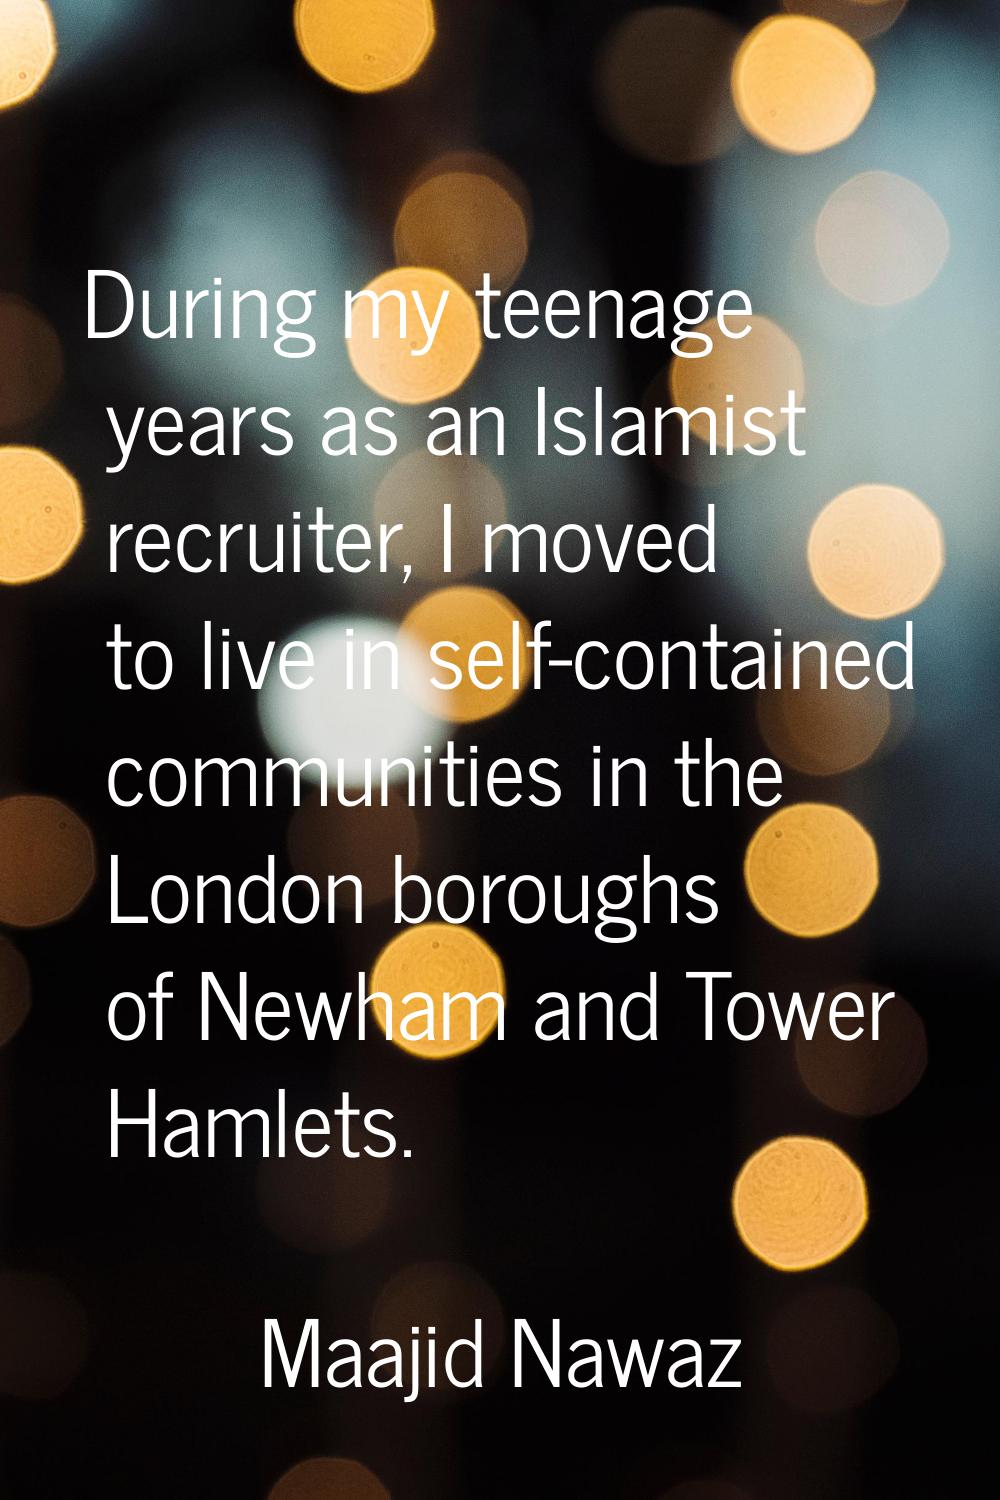 During my teenage years as an Islamist recruiter, I moved to live in self-contained communities in 